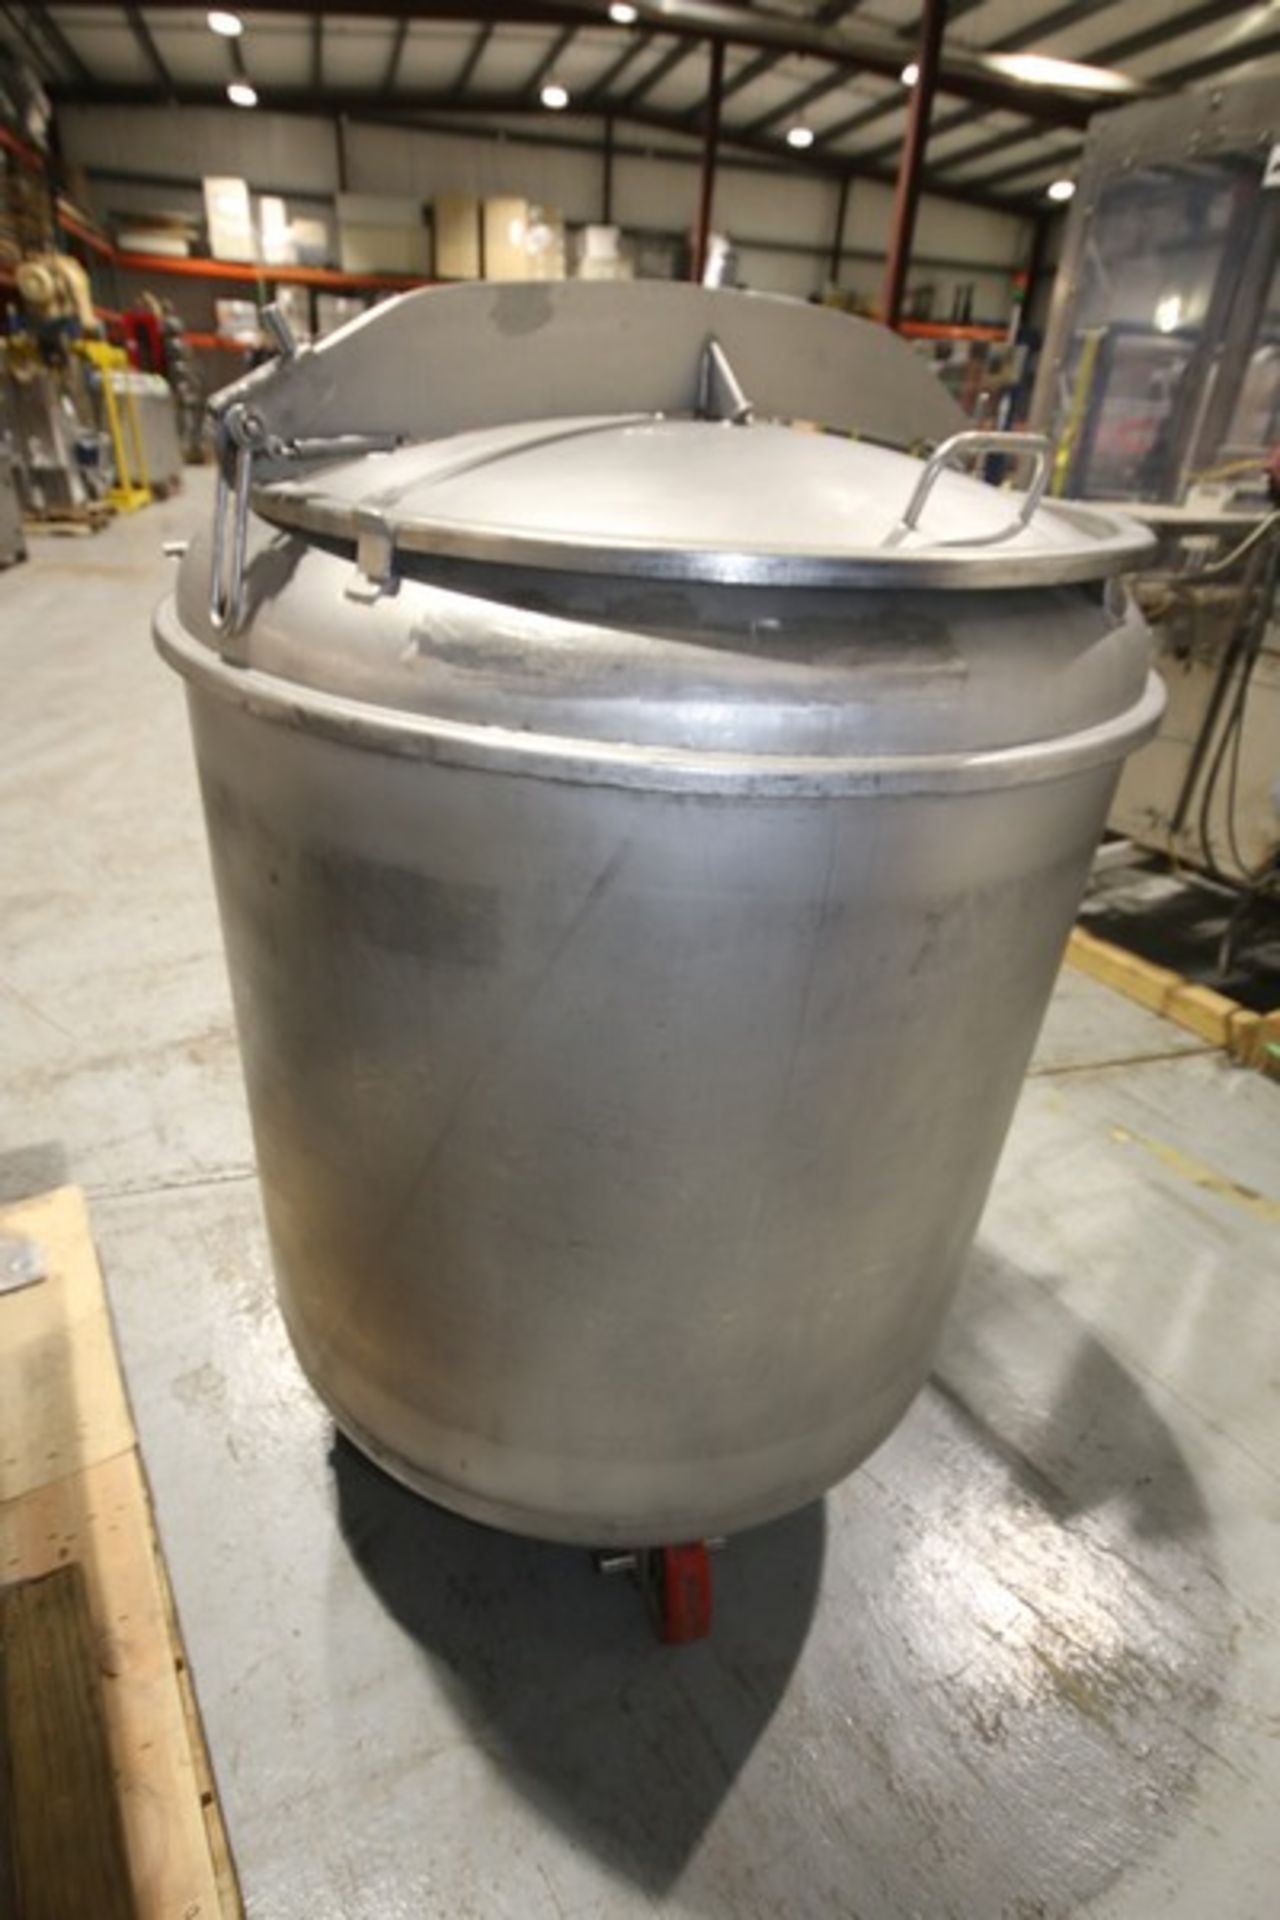 Aprox. 39" W x 46" H Portable S/S Tanks, with Welded Inside Baffles & Lid (INV#92818) (Located @ the - Image 5 of 6